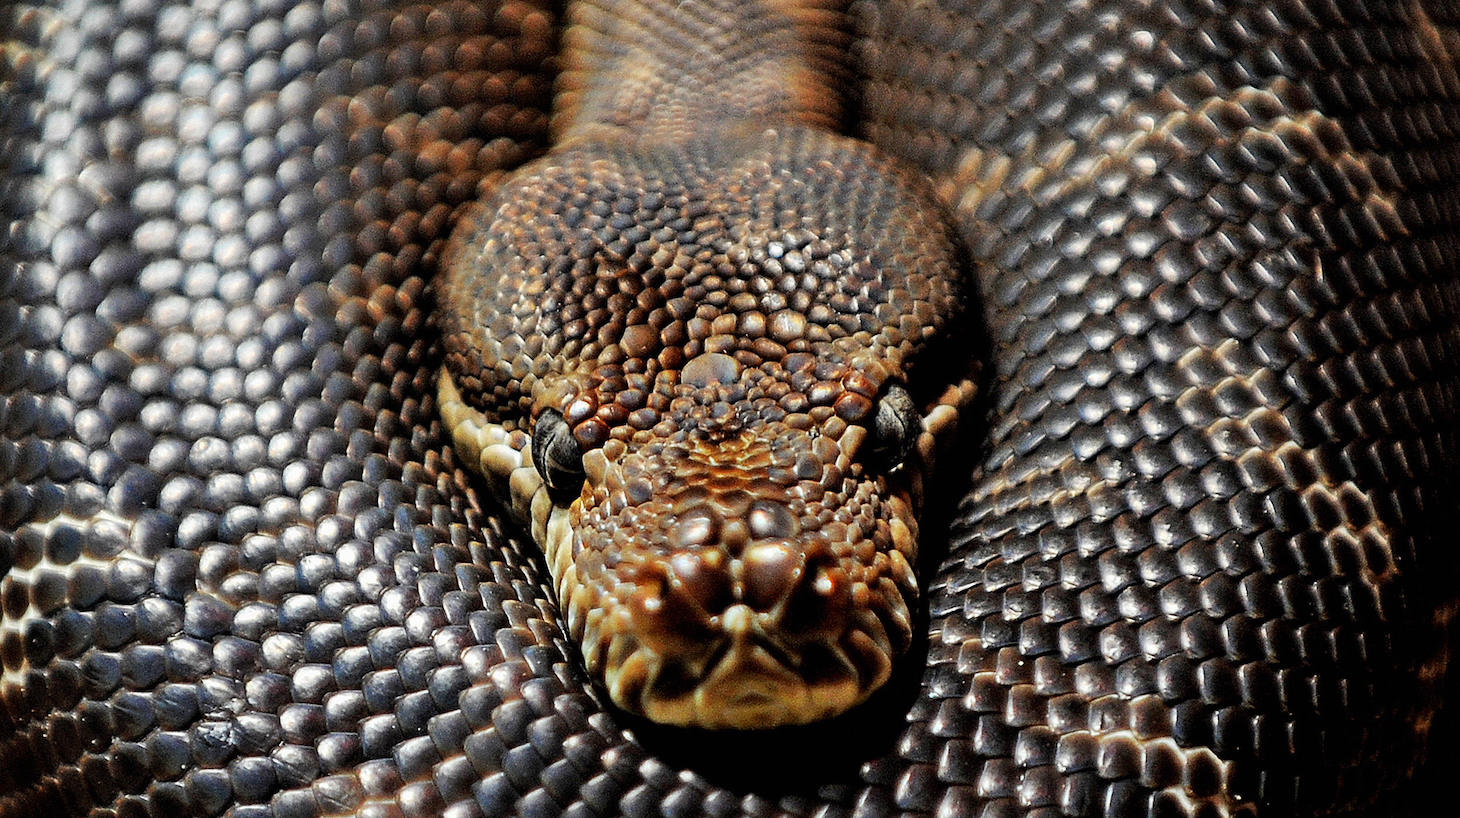 A Centralian carpet python lies coiled at Sydney Wildlife World on September 11, 2009 which features Australian flora and fauna set amongst natural habitats and eco-systems. The non-venomous Centralian carpet python found only in Australia's Northern Territory, uses its colouring to help it blend in with the red sand and rock found in its usual arid desert habitat. Like other carpet pythons it is mainly nocturnal and feeds on small mammals, birds and reptiles. AFP PHOTO / Greg WOOD (Photo credit should read GREG WOOD/AFP via Getty Images)